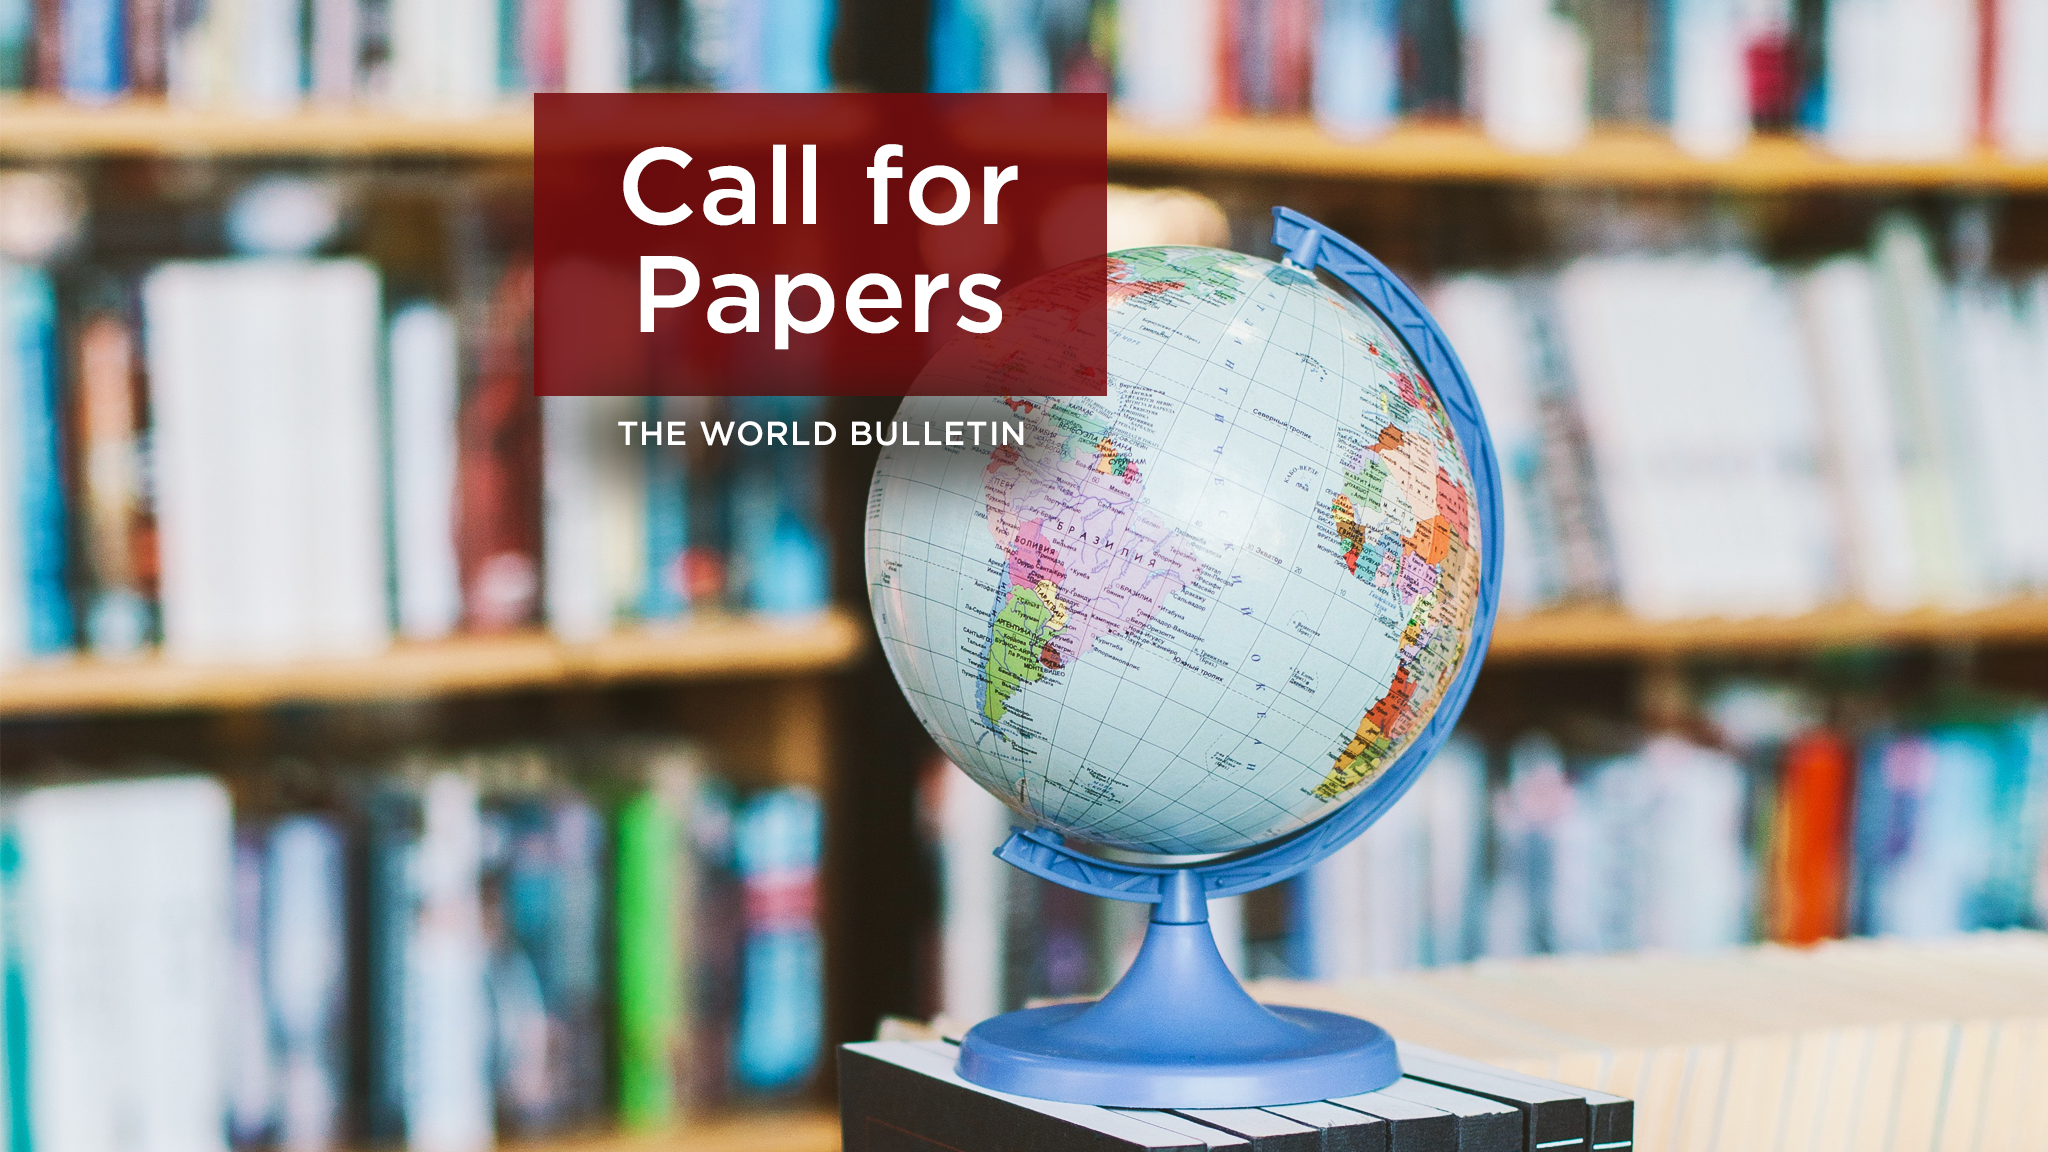 The World Bulletin Journal Call for Papers